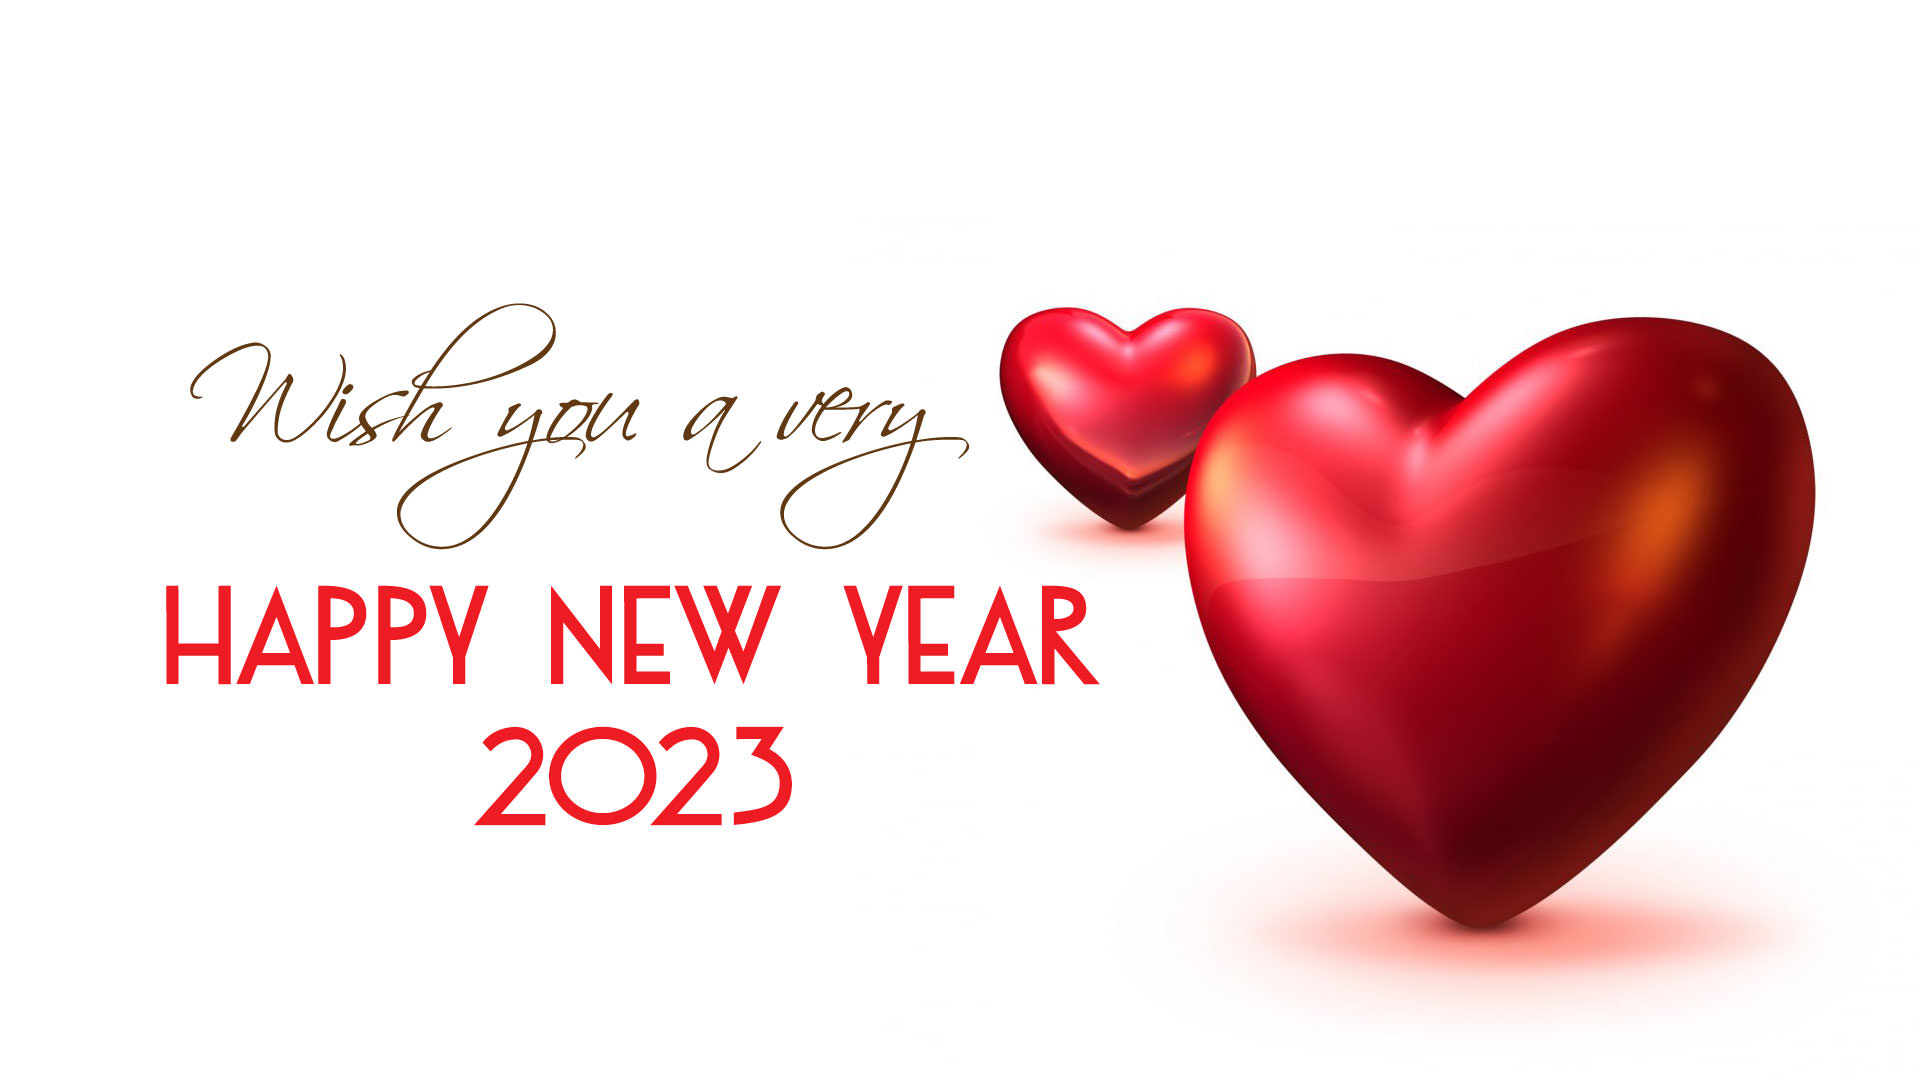 Wish You a Very Happy New Year 2023 Love Heart Wallpaper